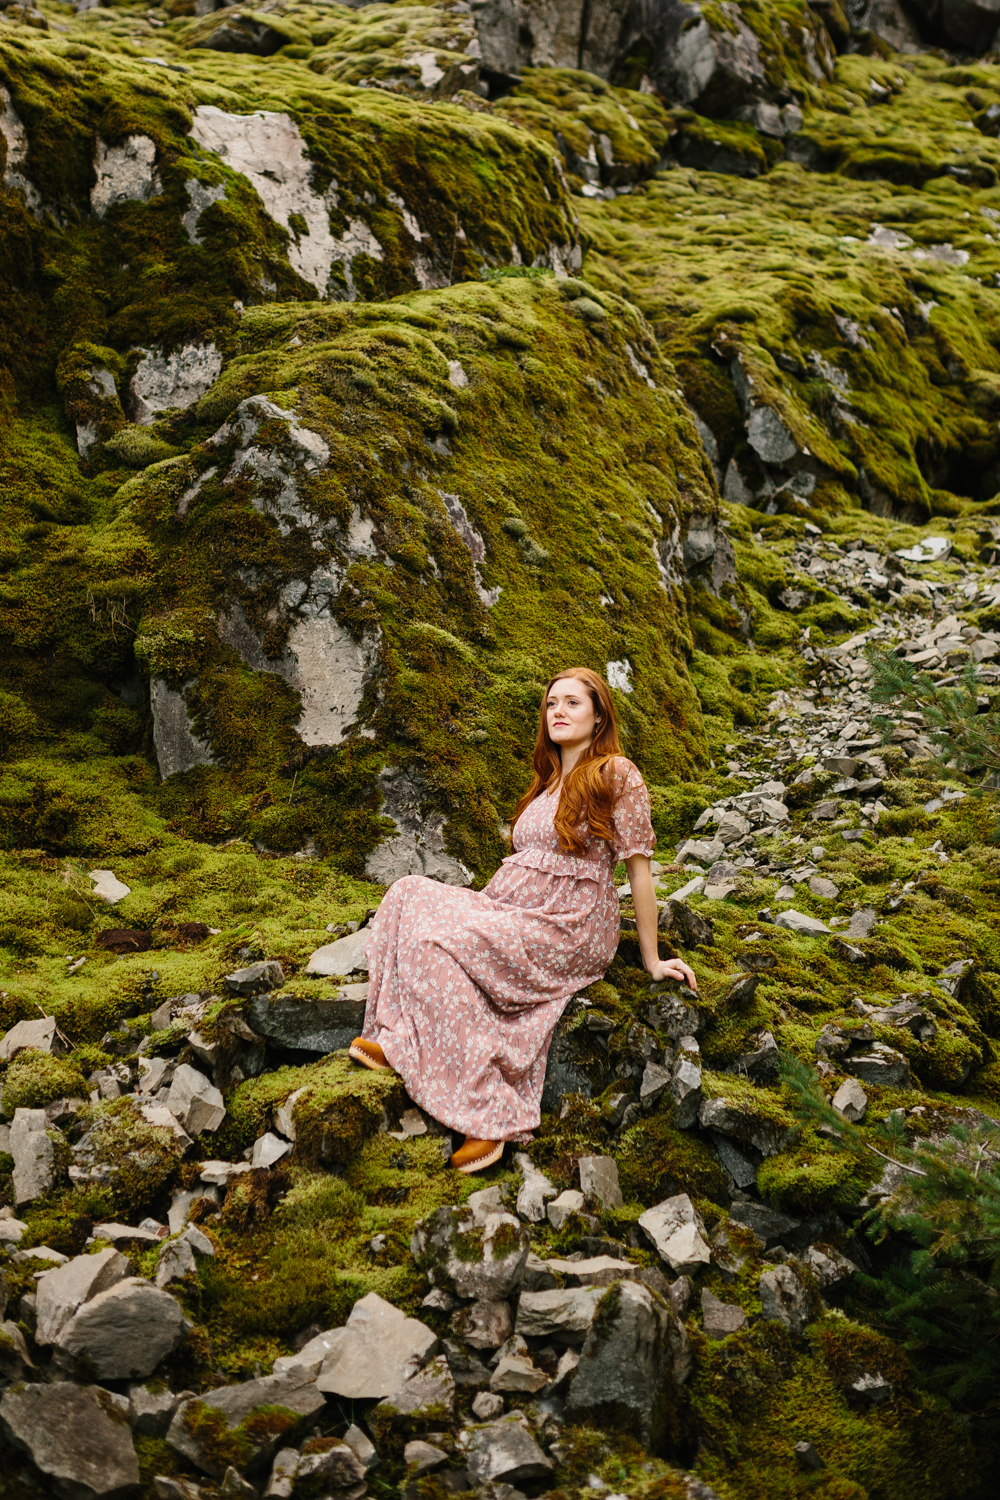 A beautiful, red-haired woman sitting on mossy rocks